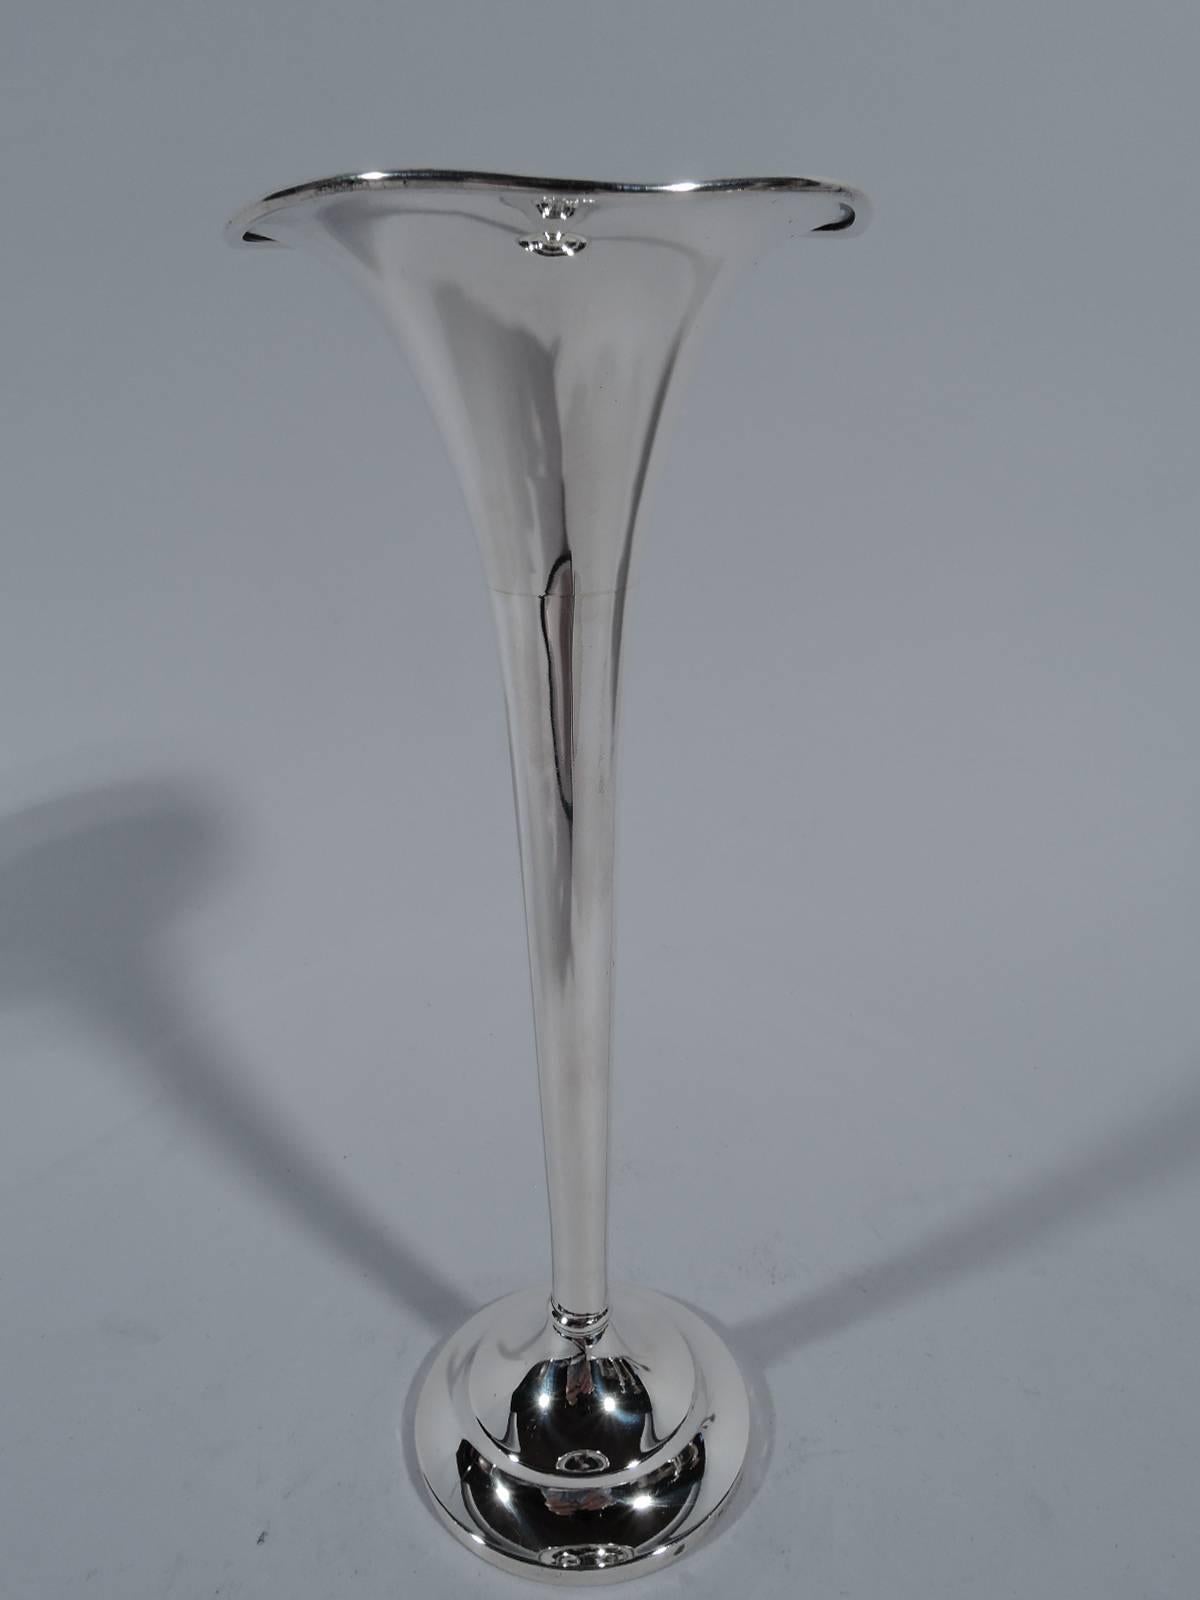 Pretty sterling silver bud vase. Made by Fradley in New York. Tapering and narrow with gently wavy rim and stepped foot. Hallmark includes no. 2656. Weighted.